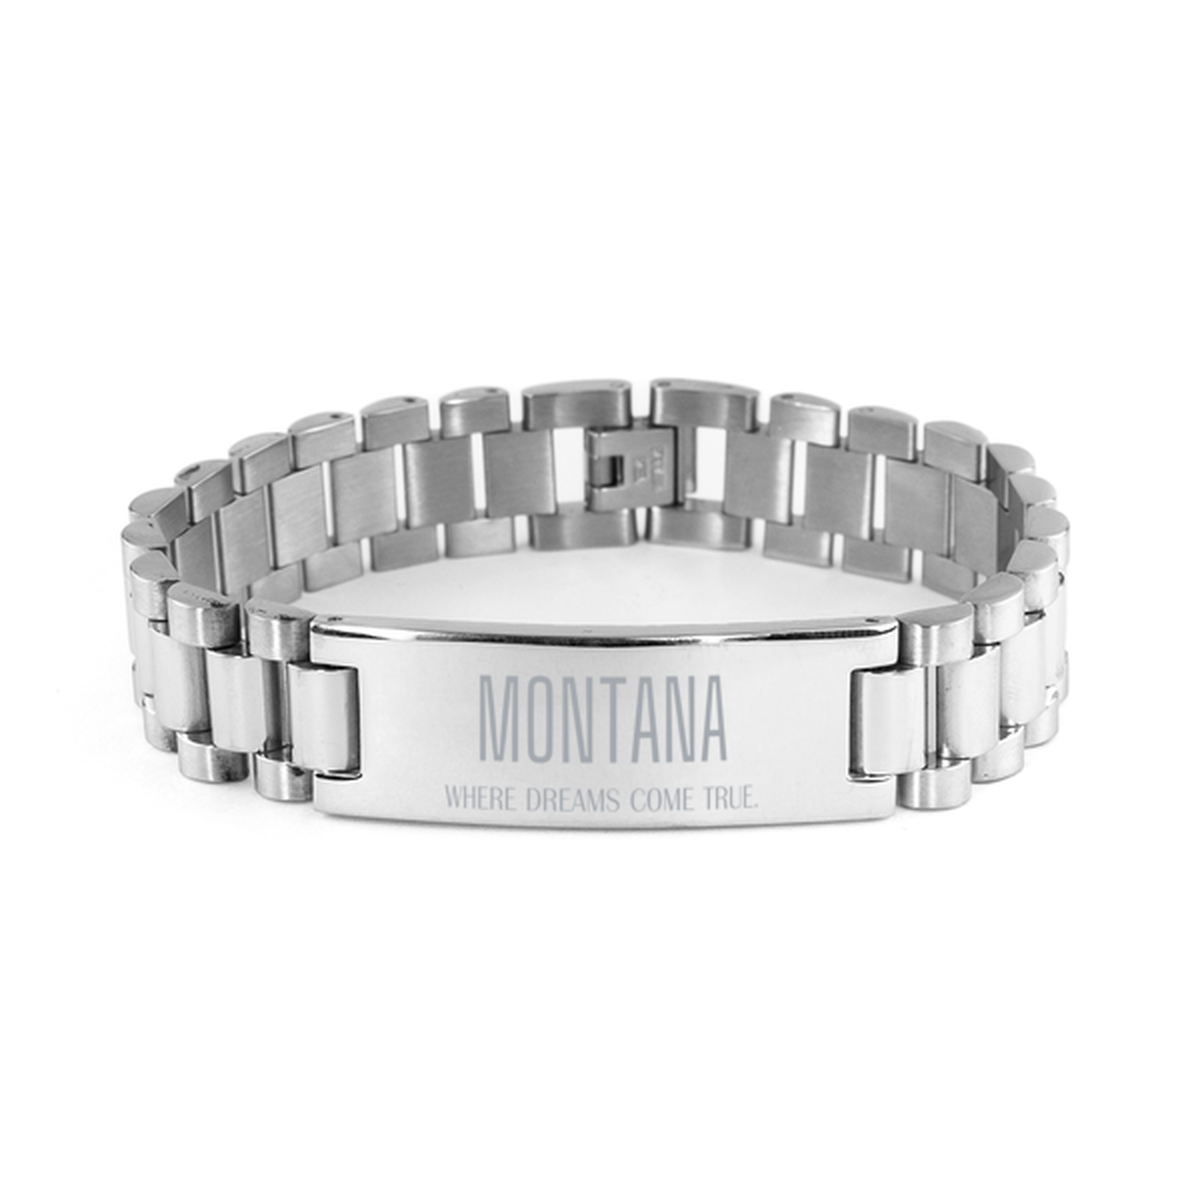 Love Montana State Ladder Stainless Steel Bracelet, Montana Where dreams come true, Birthday Inspirational Gifts For Montana Men, Women, Friends